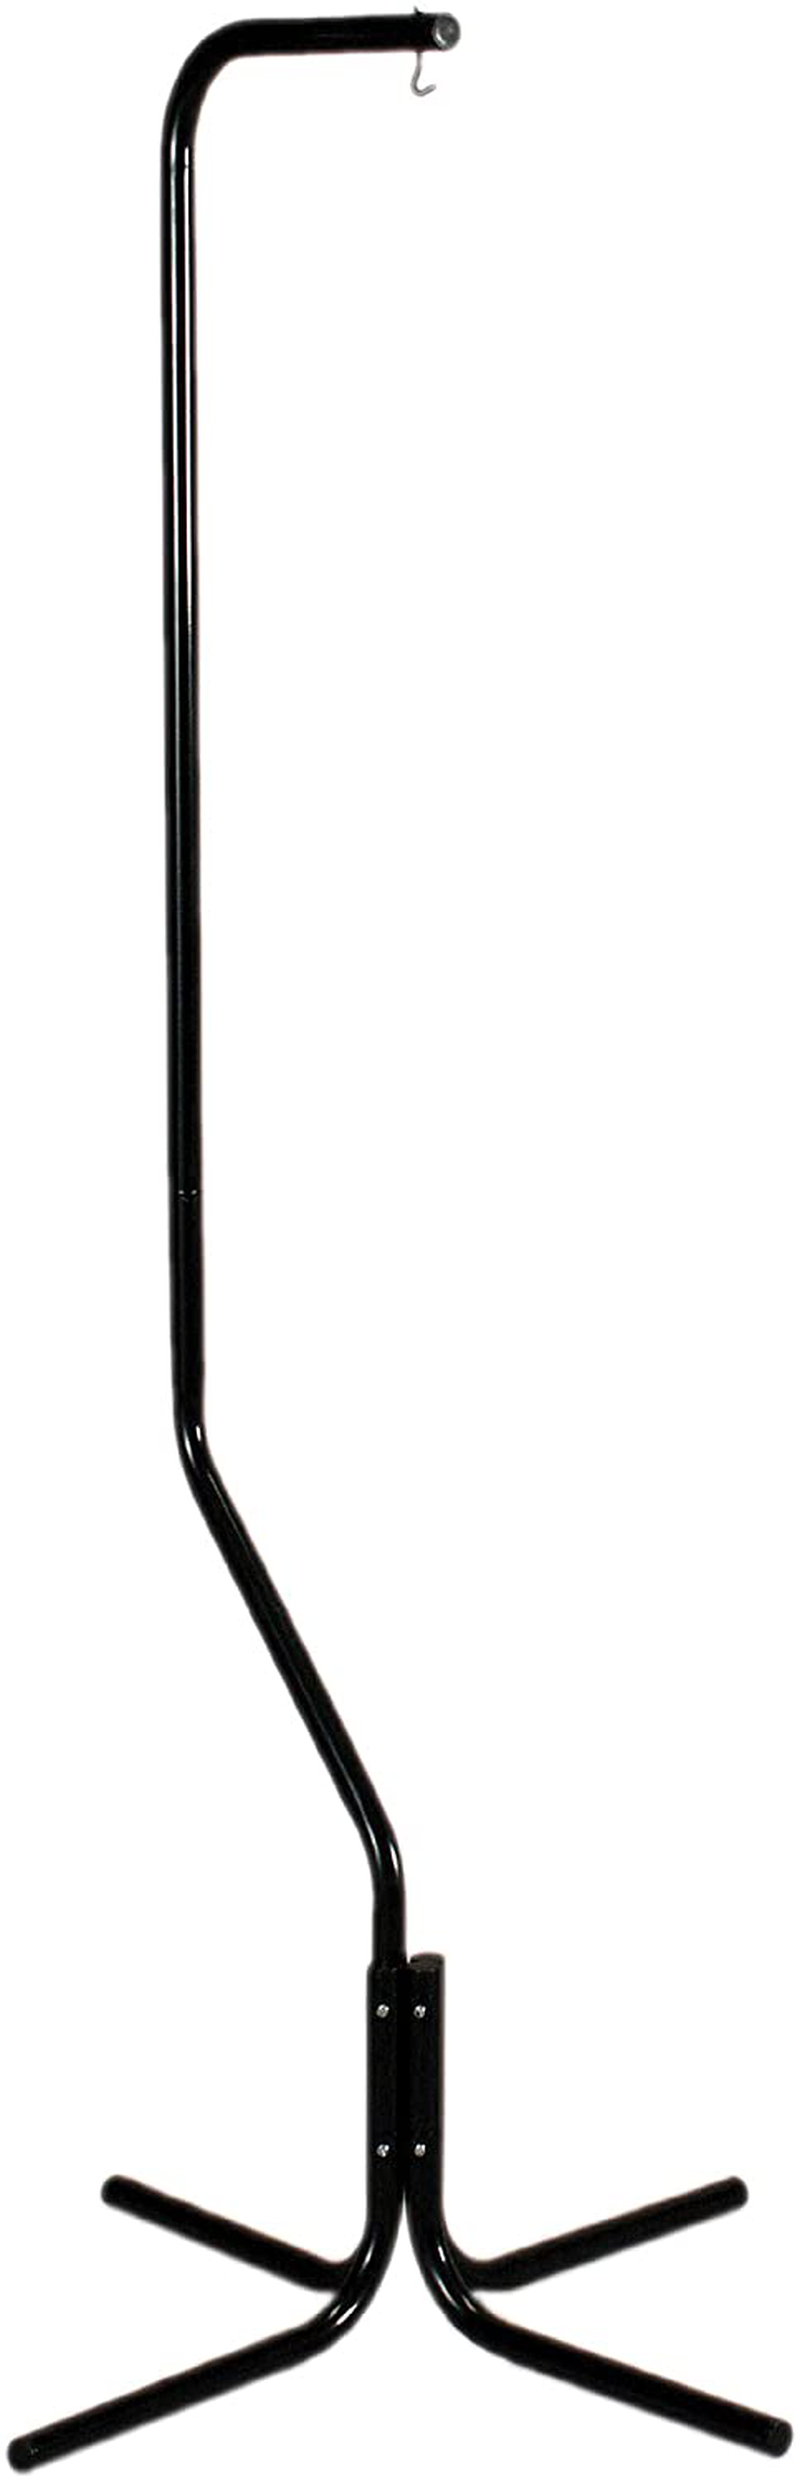 Prevue Hendryx Tubular Steel Hanging Bird Cage Stand 1780 Black, 24-Inch by 24-Inch by 62-Inch